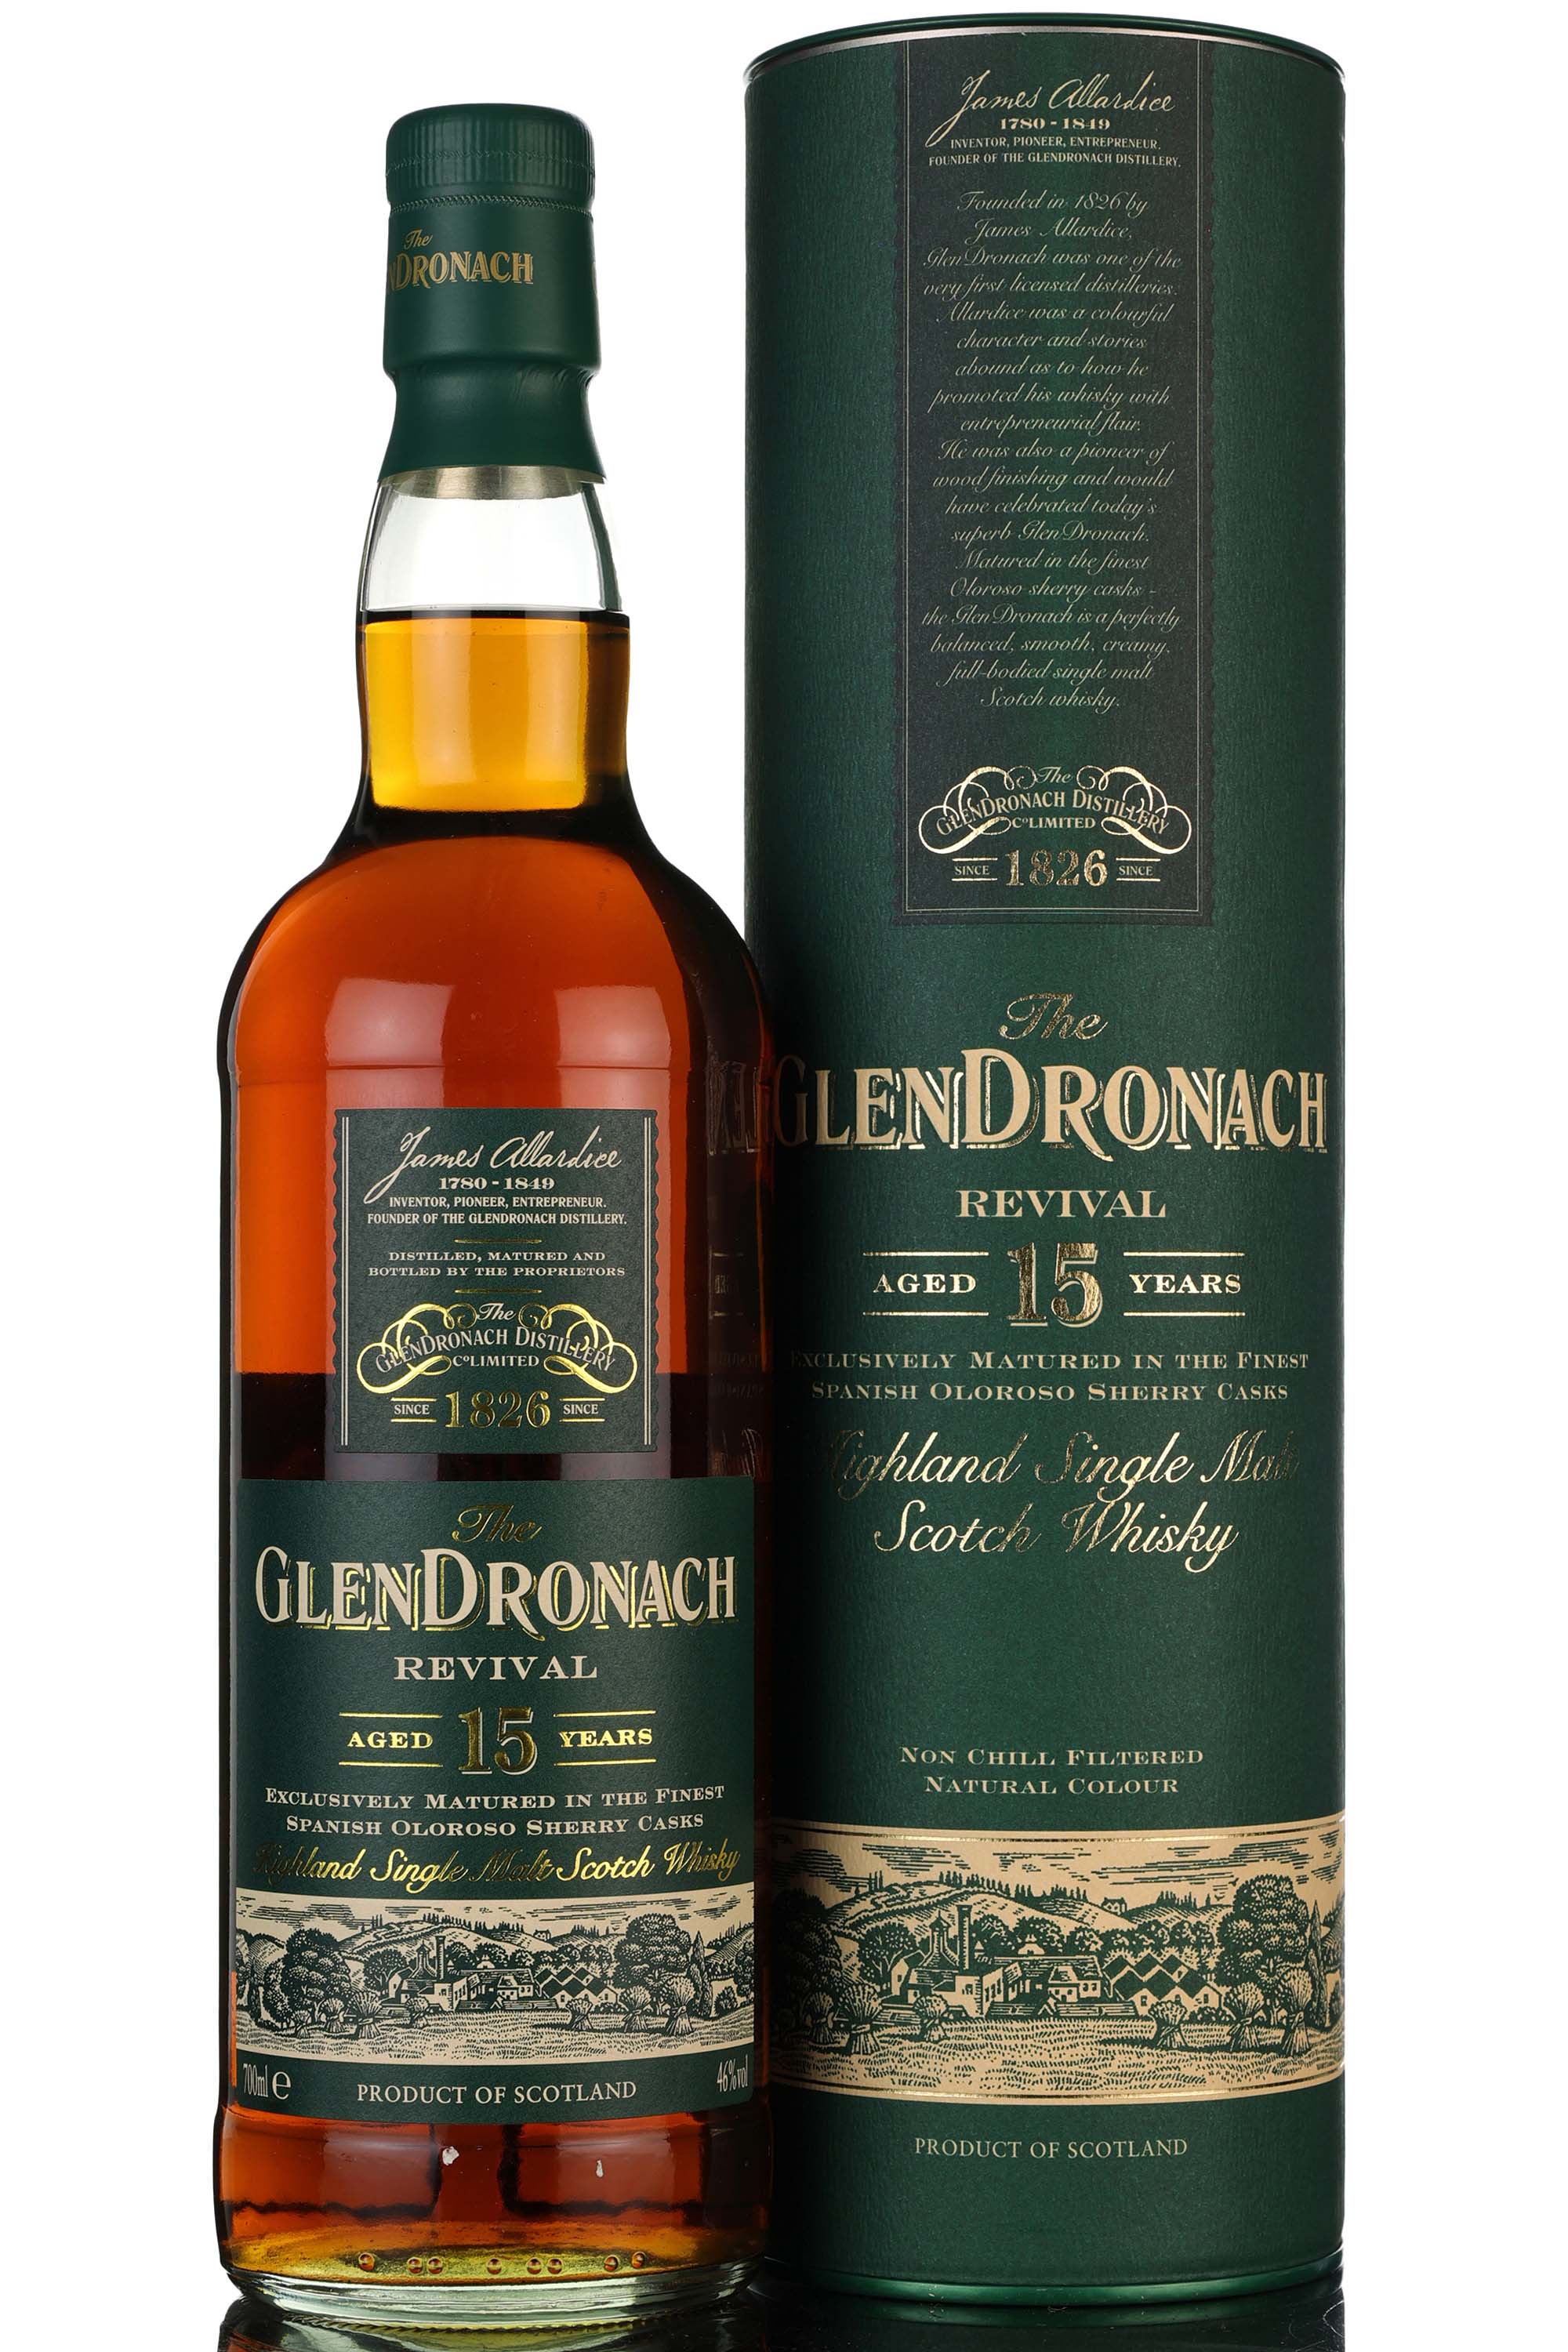 Glendronach 15 Year Old - Revival - 2014 Release